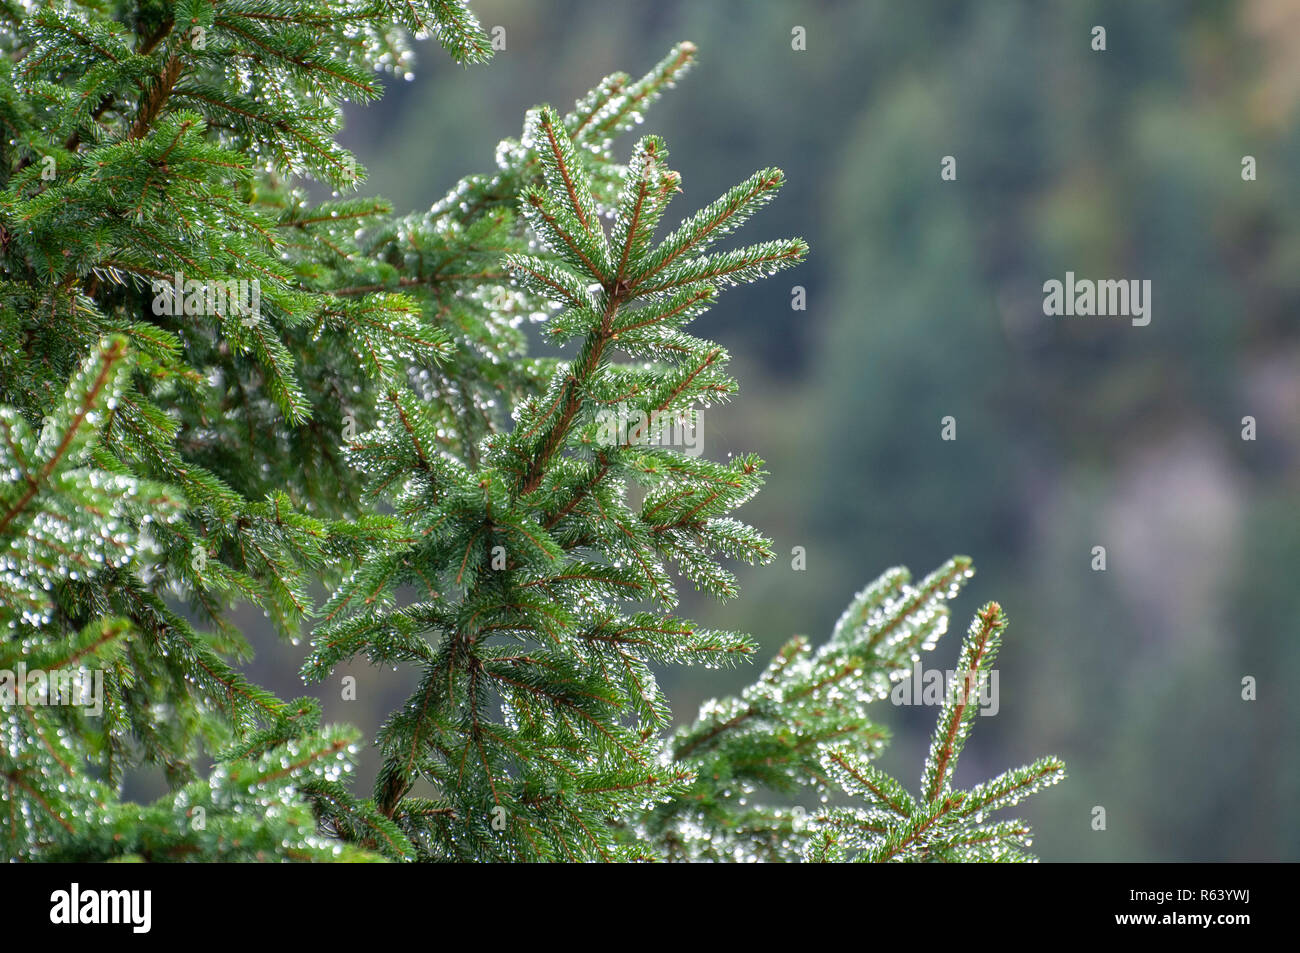 Needle Shaped Leaves High Resolution Stock Photography and Images - Alamy